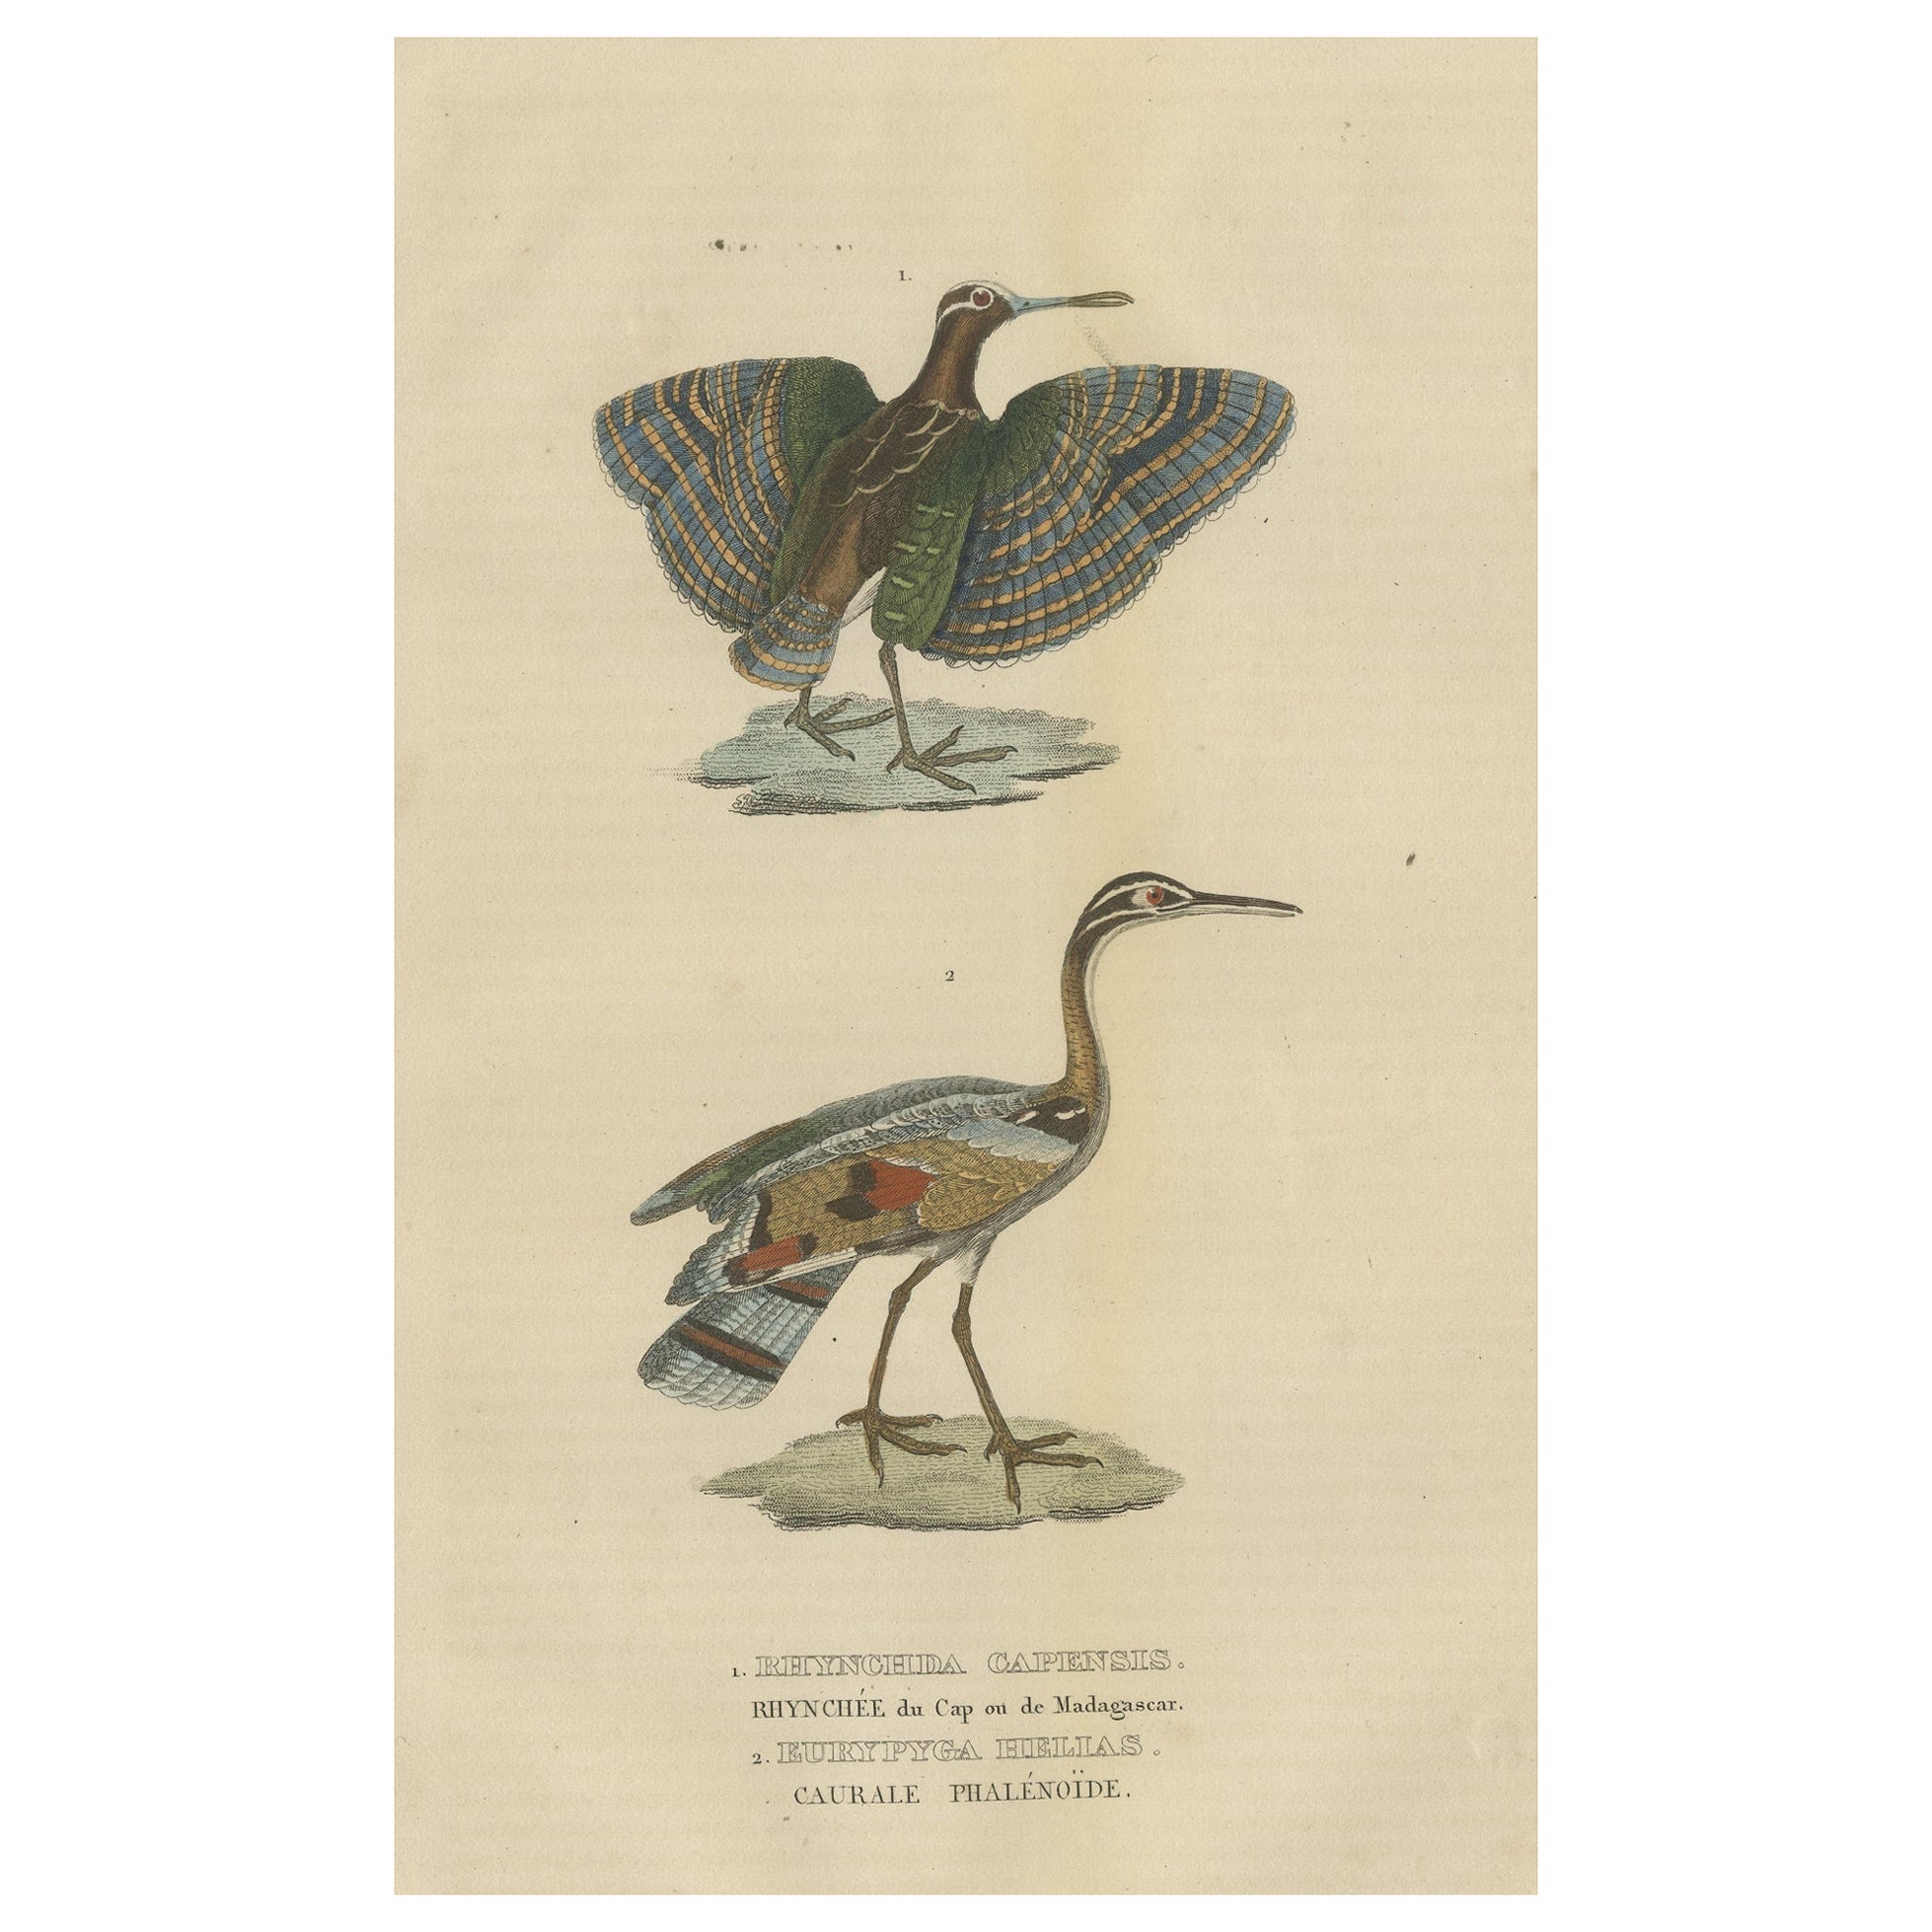 Original Hand-Colored Bird Print of a Painted Snipe and Sunbittern Bird For Sale